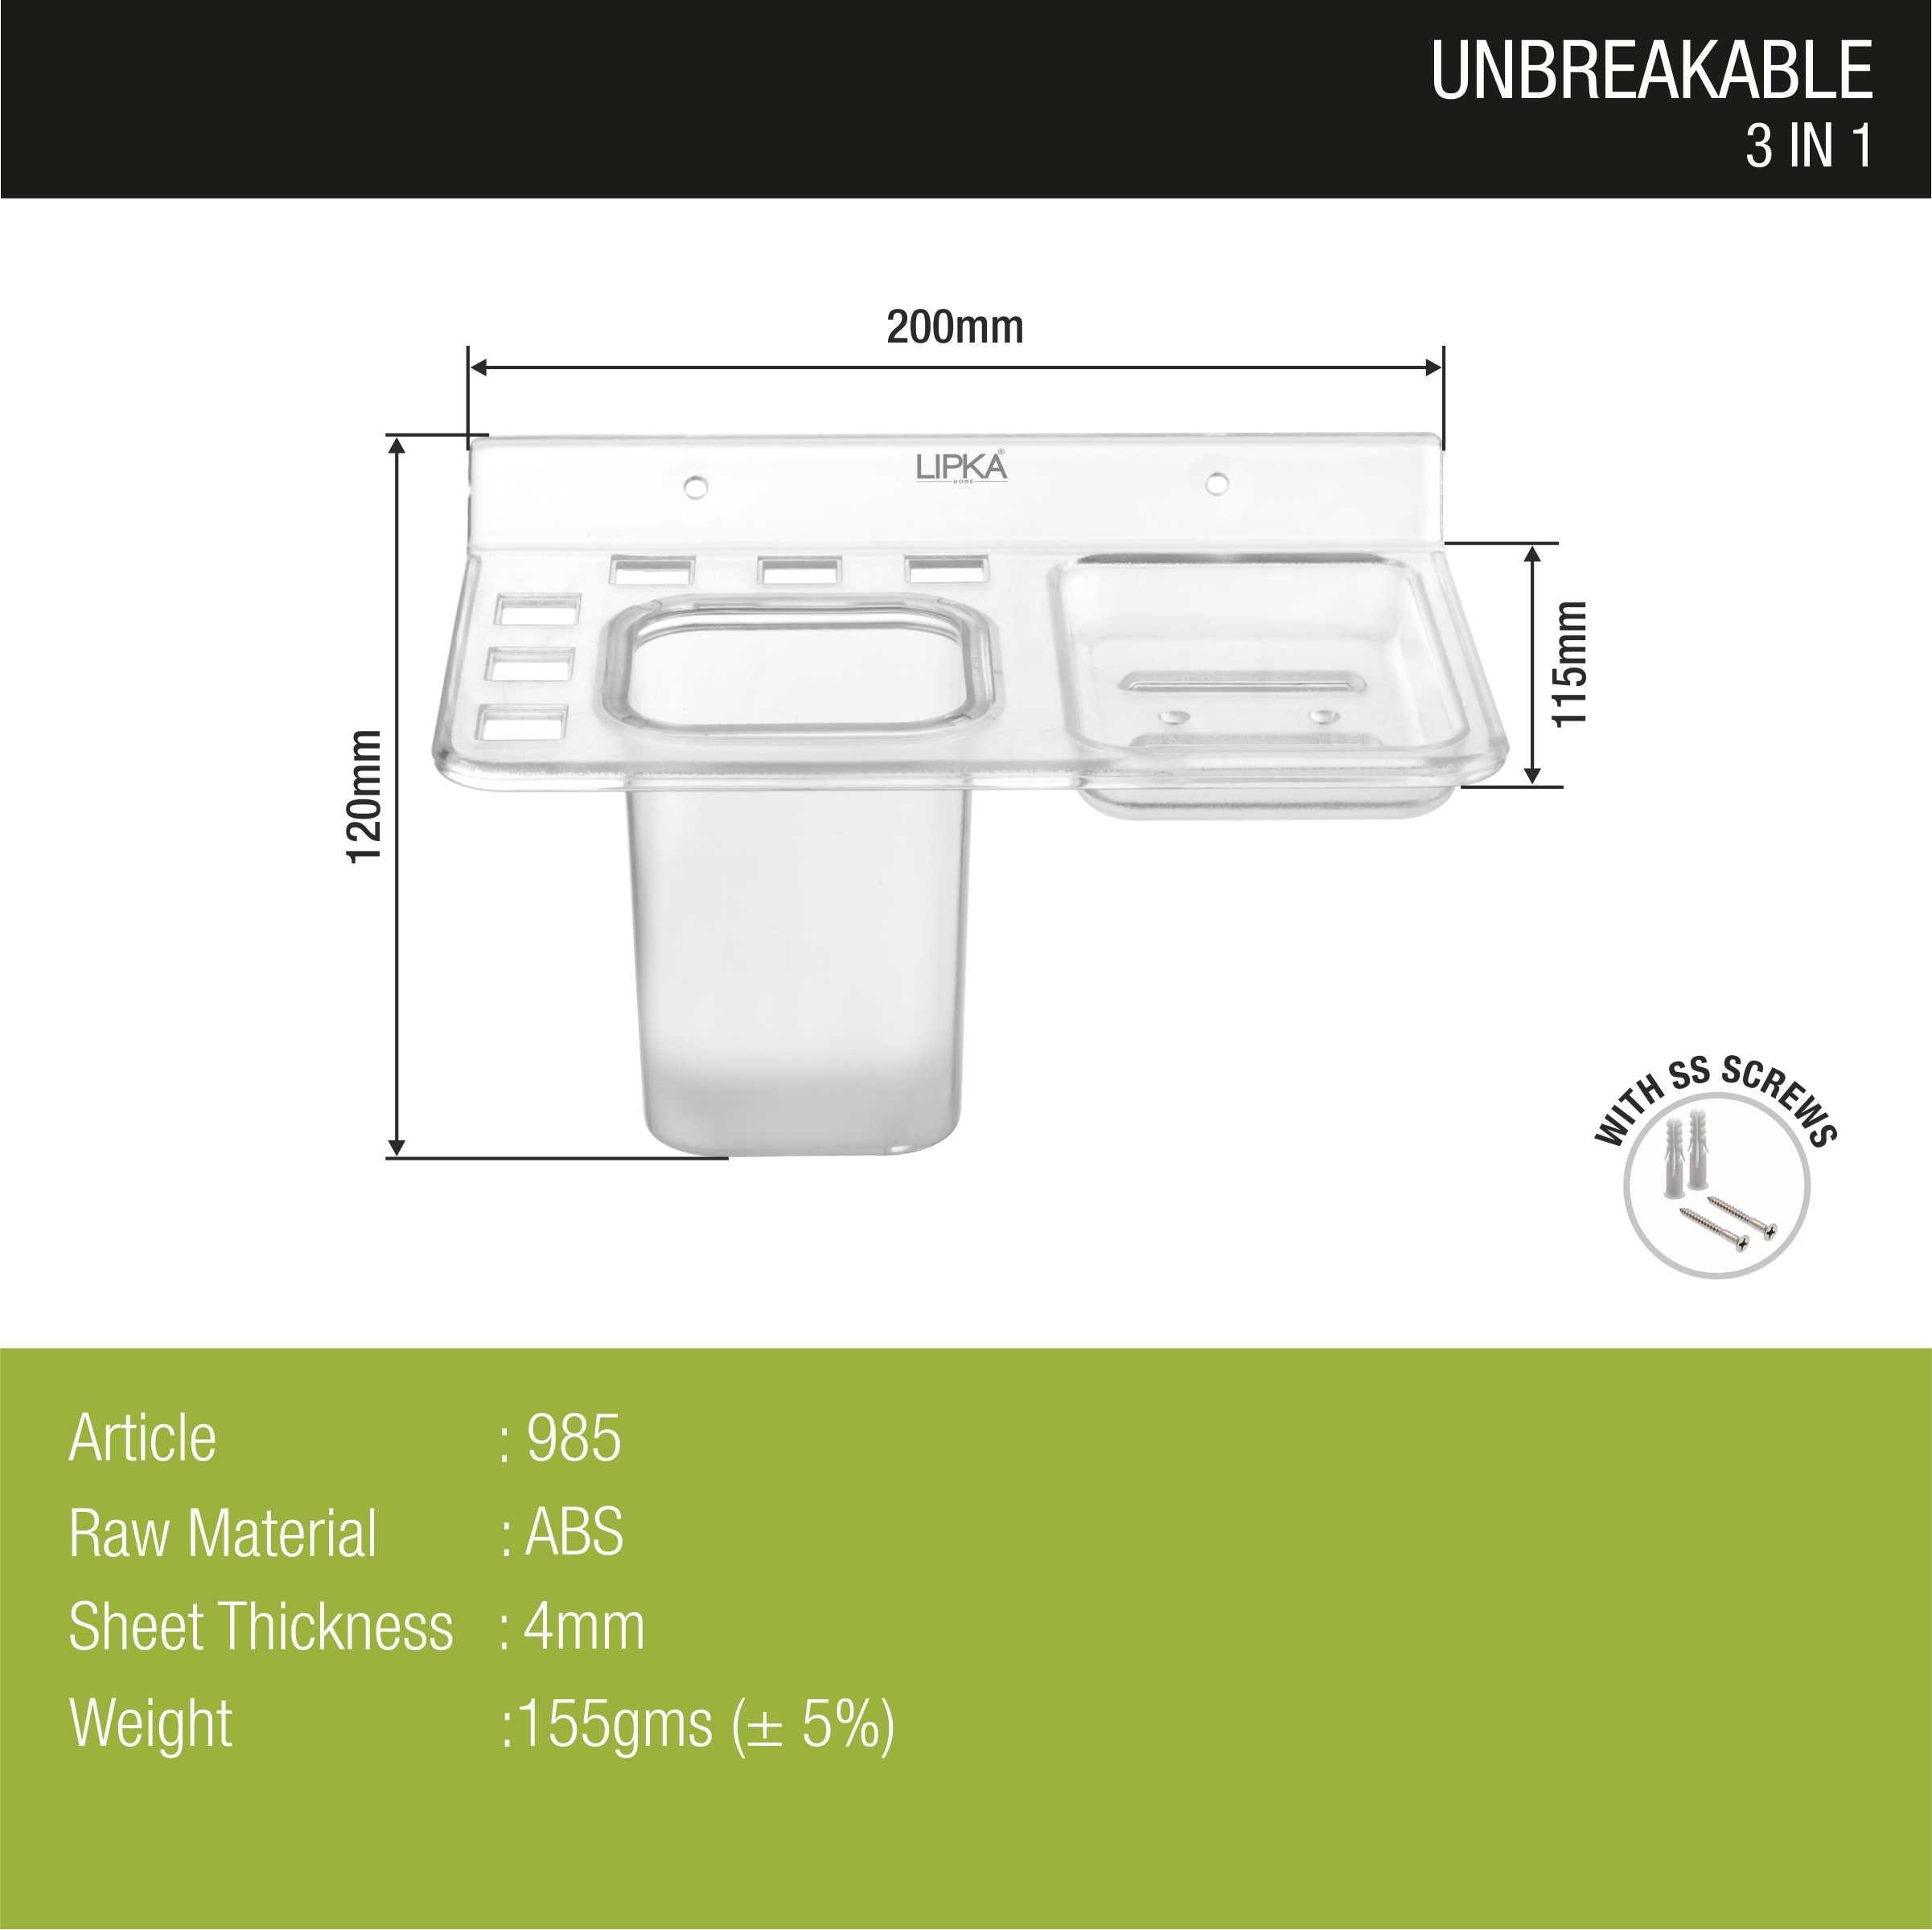 3-in-1 Shelf Tray (Tumbler, Toothbrush Holder & Soap Dish) dimensions and sizes